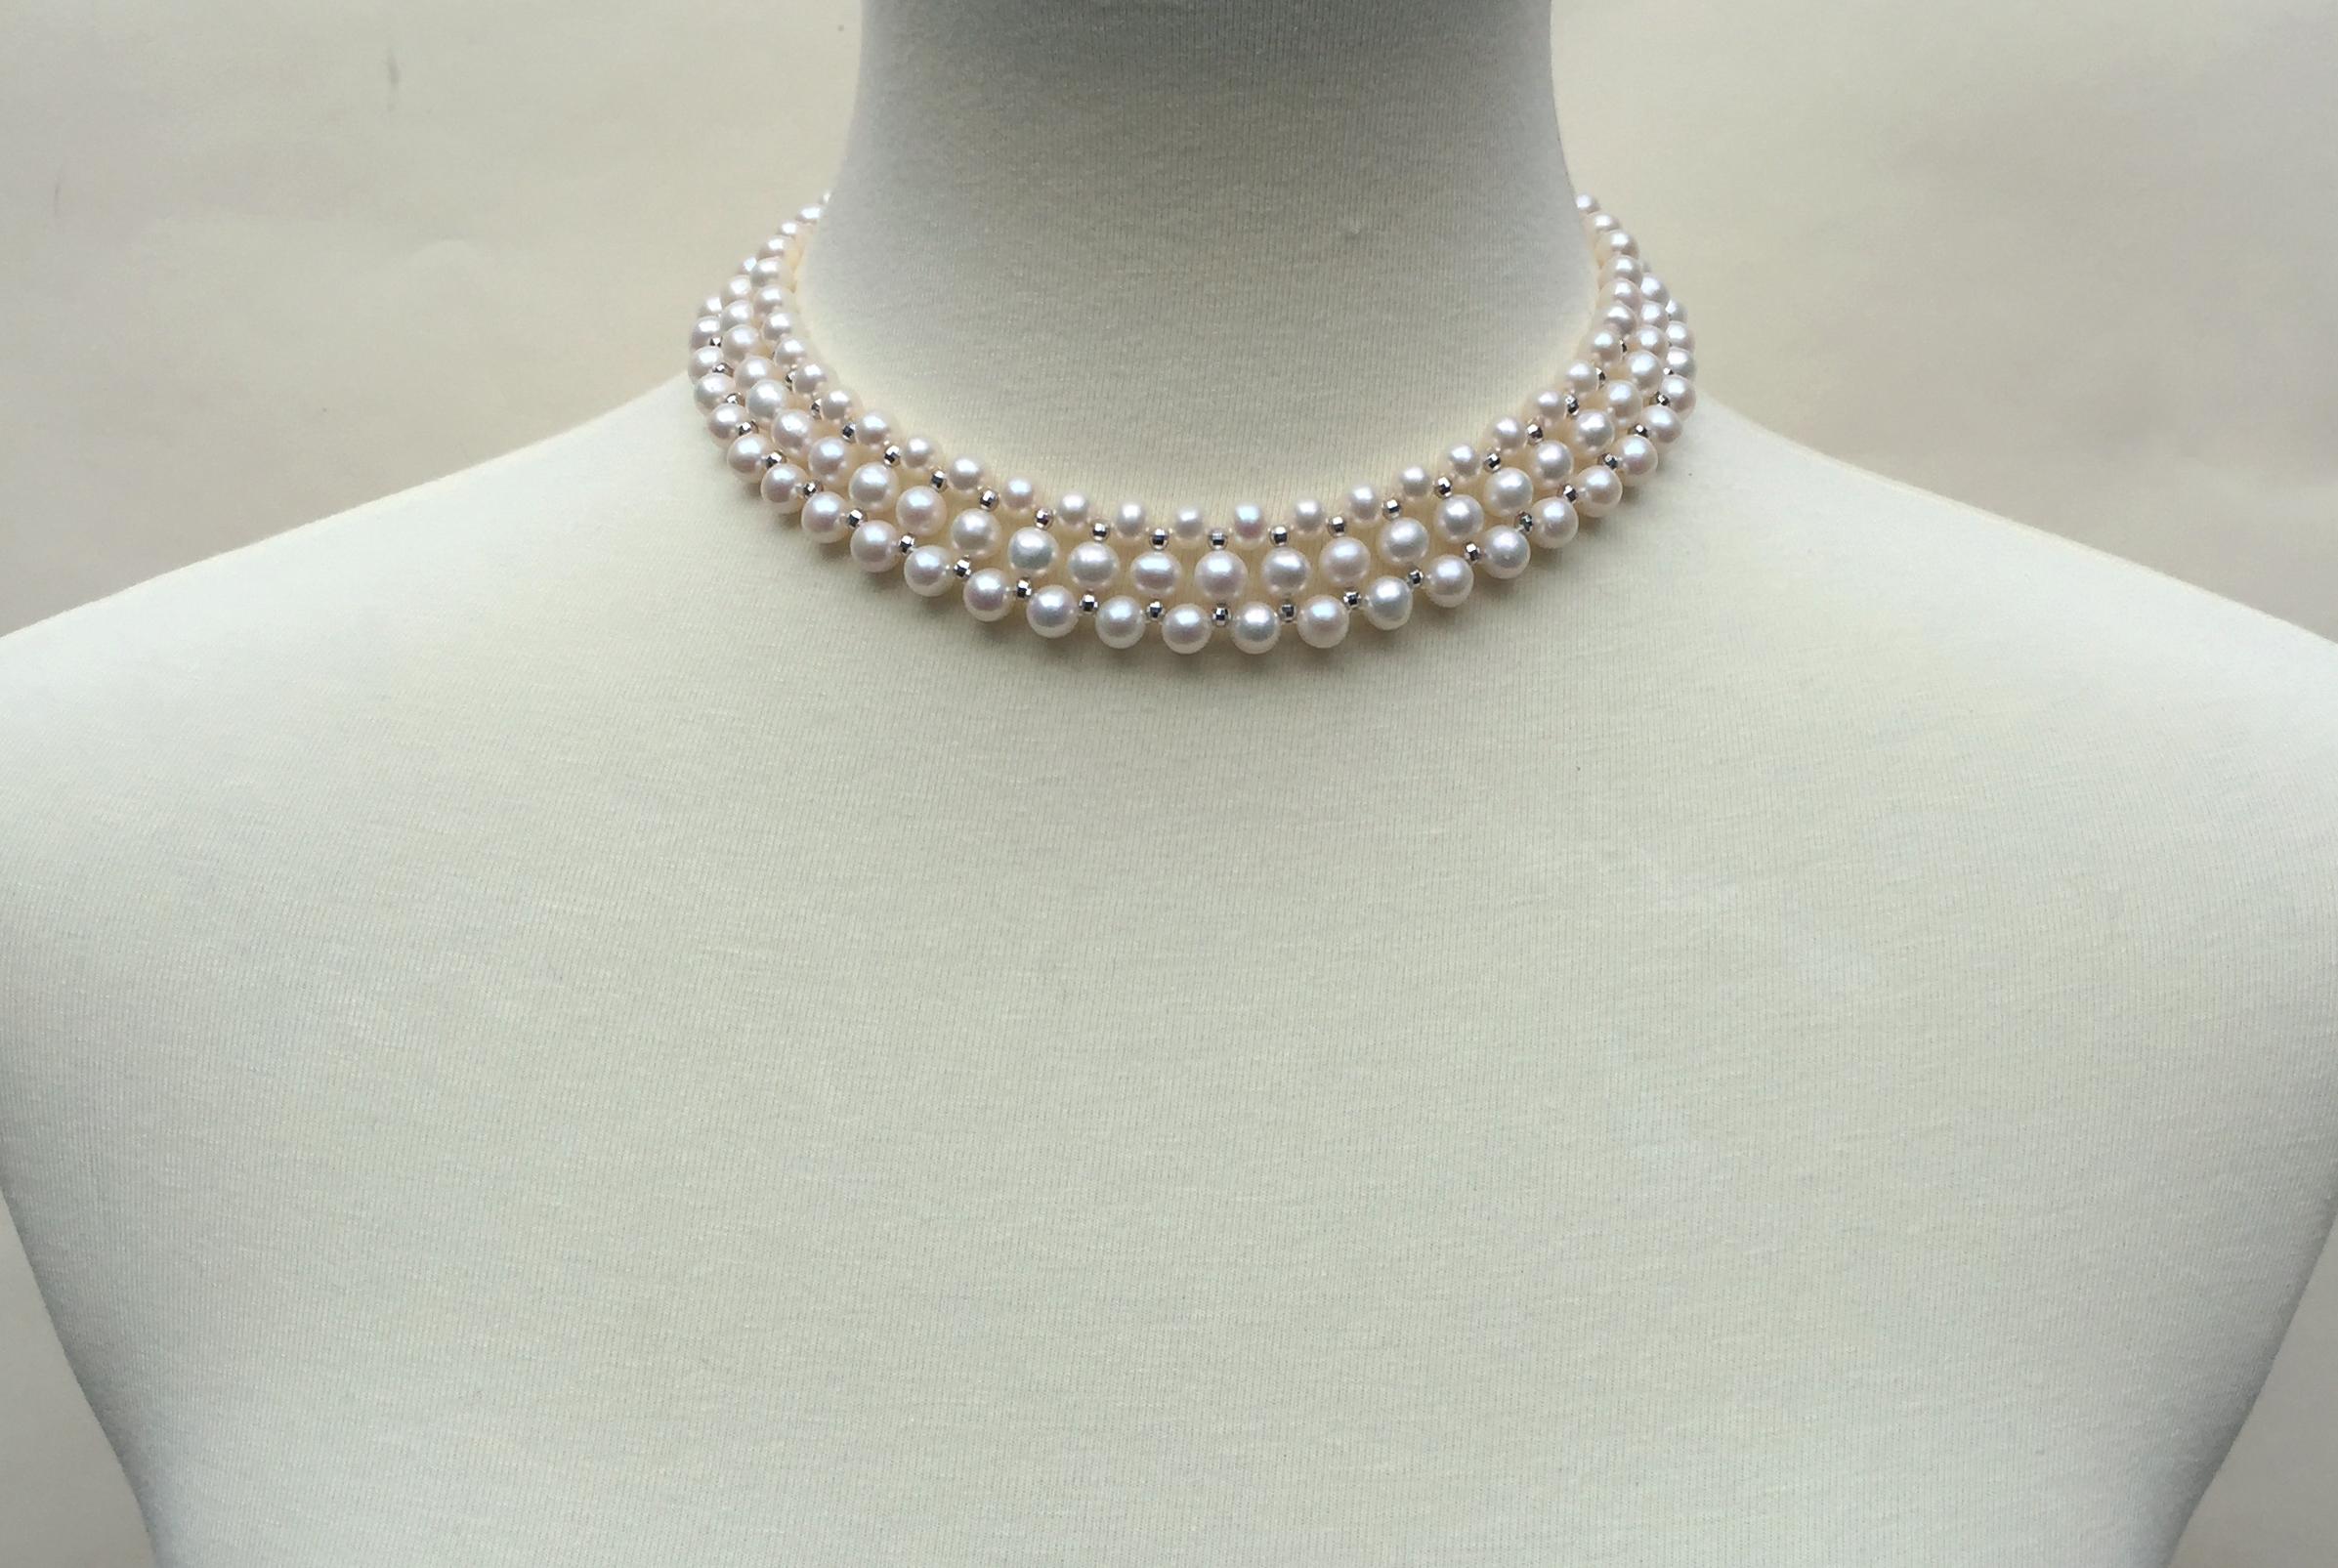 Artist Marina J Woven Pearl Necklace with 14 K White Gold Faceted Beads and Clasp